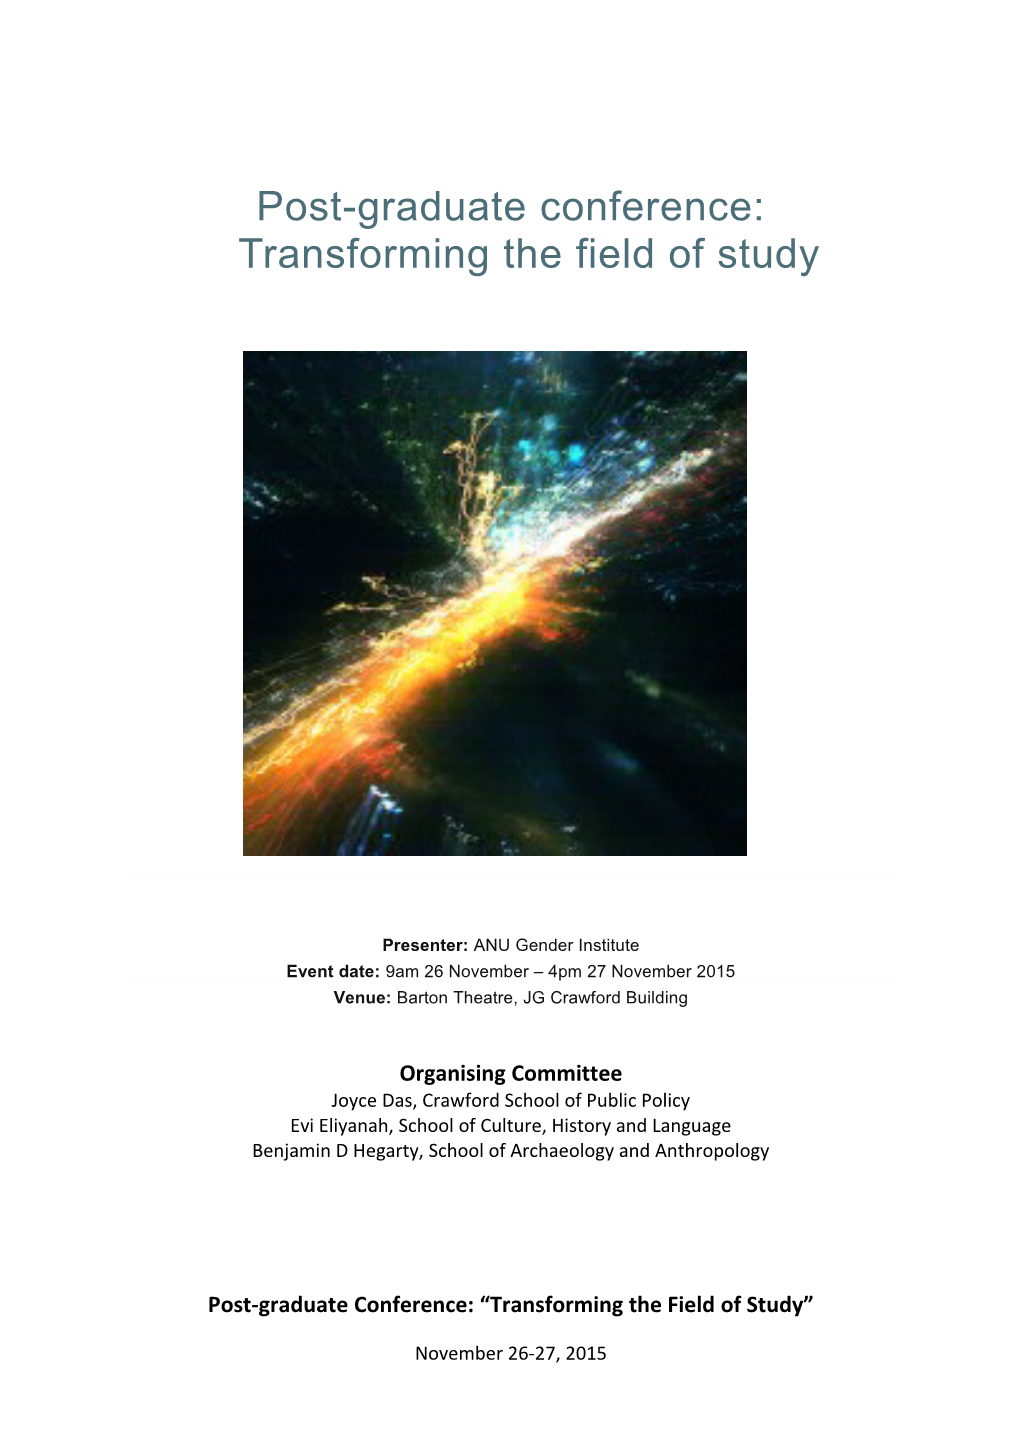 Post-Graduate Conference: Transforming the Field of Study